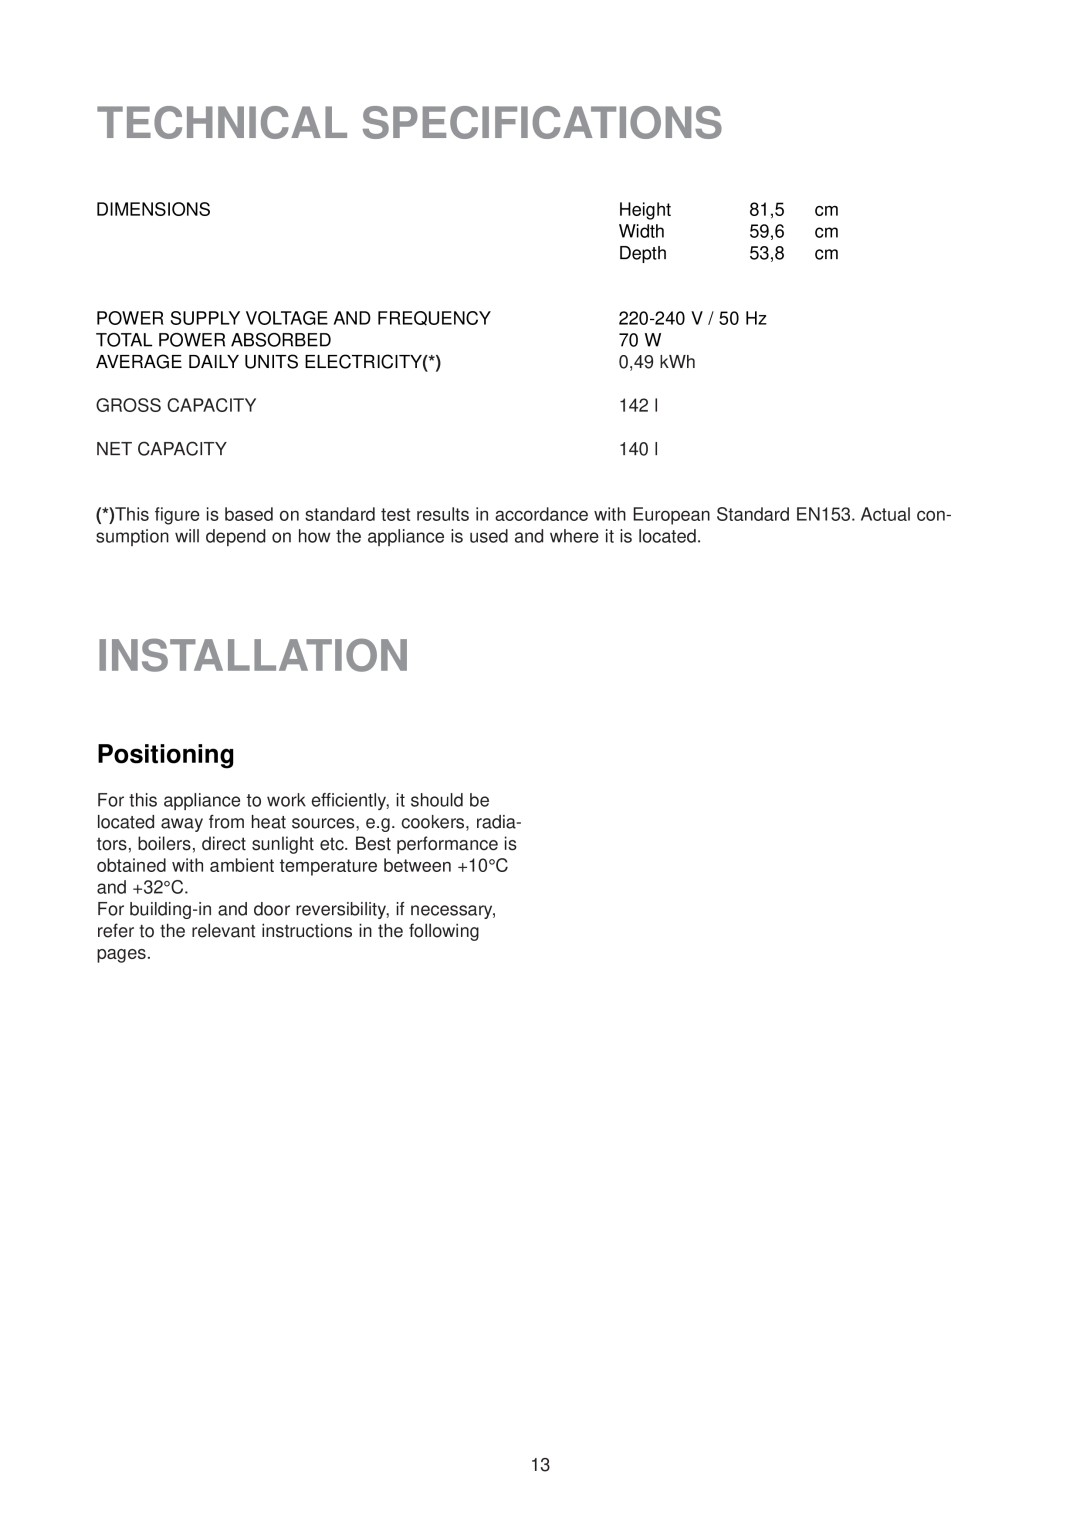 Electrolux ER 6436 manual Technical Specifications, Installation, Positioning 